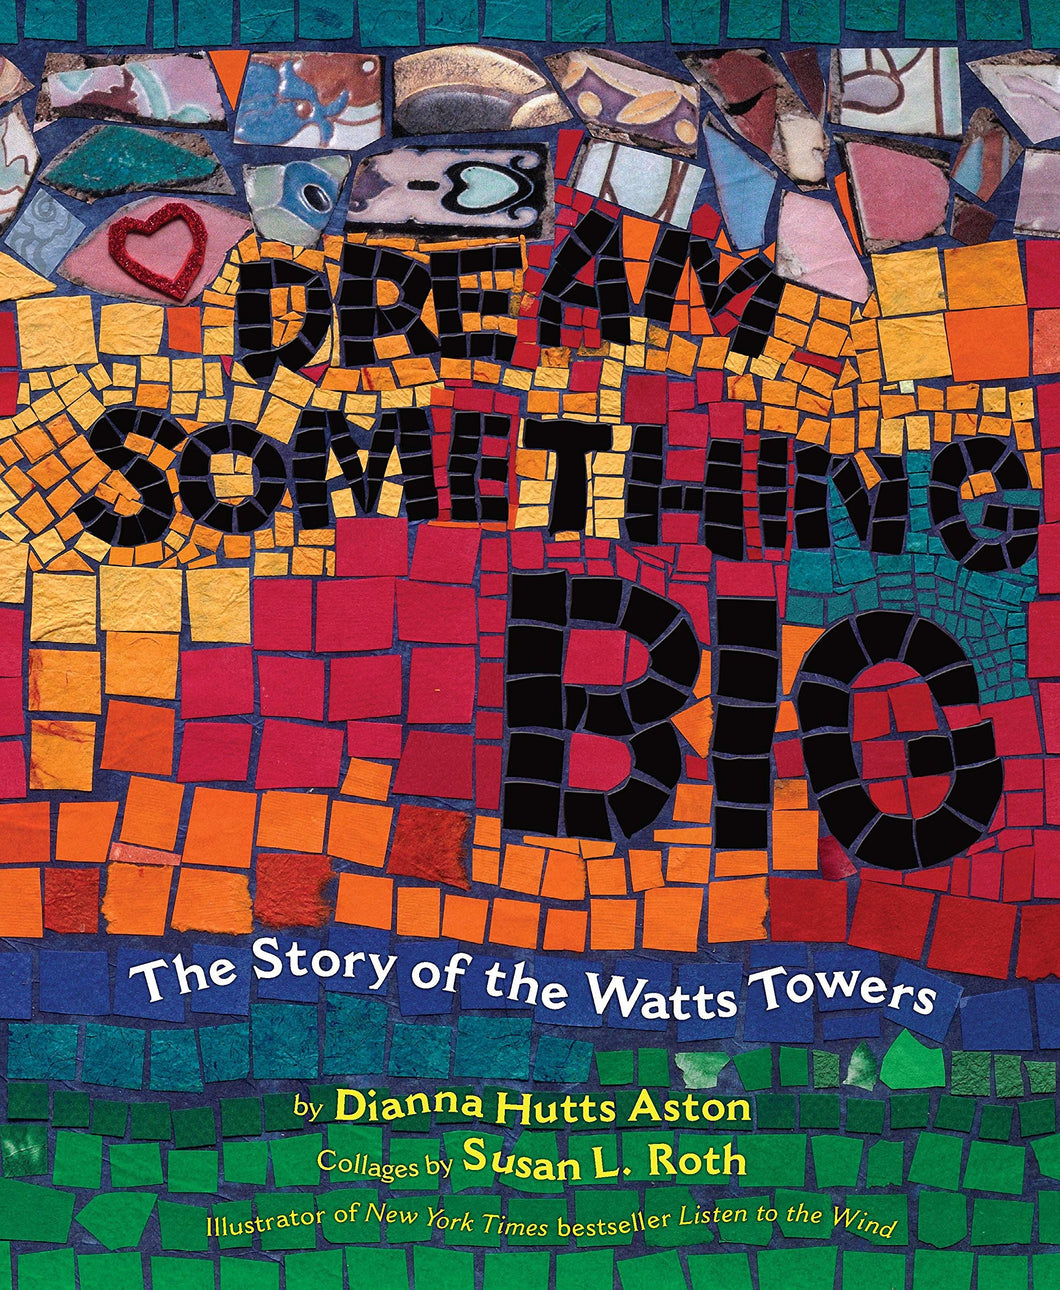 Dream Something Big: The Story of the Watts Towers by Dianna Hutts Aston